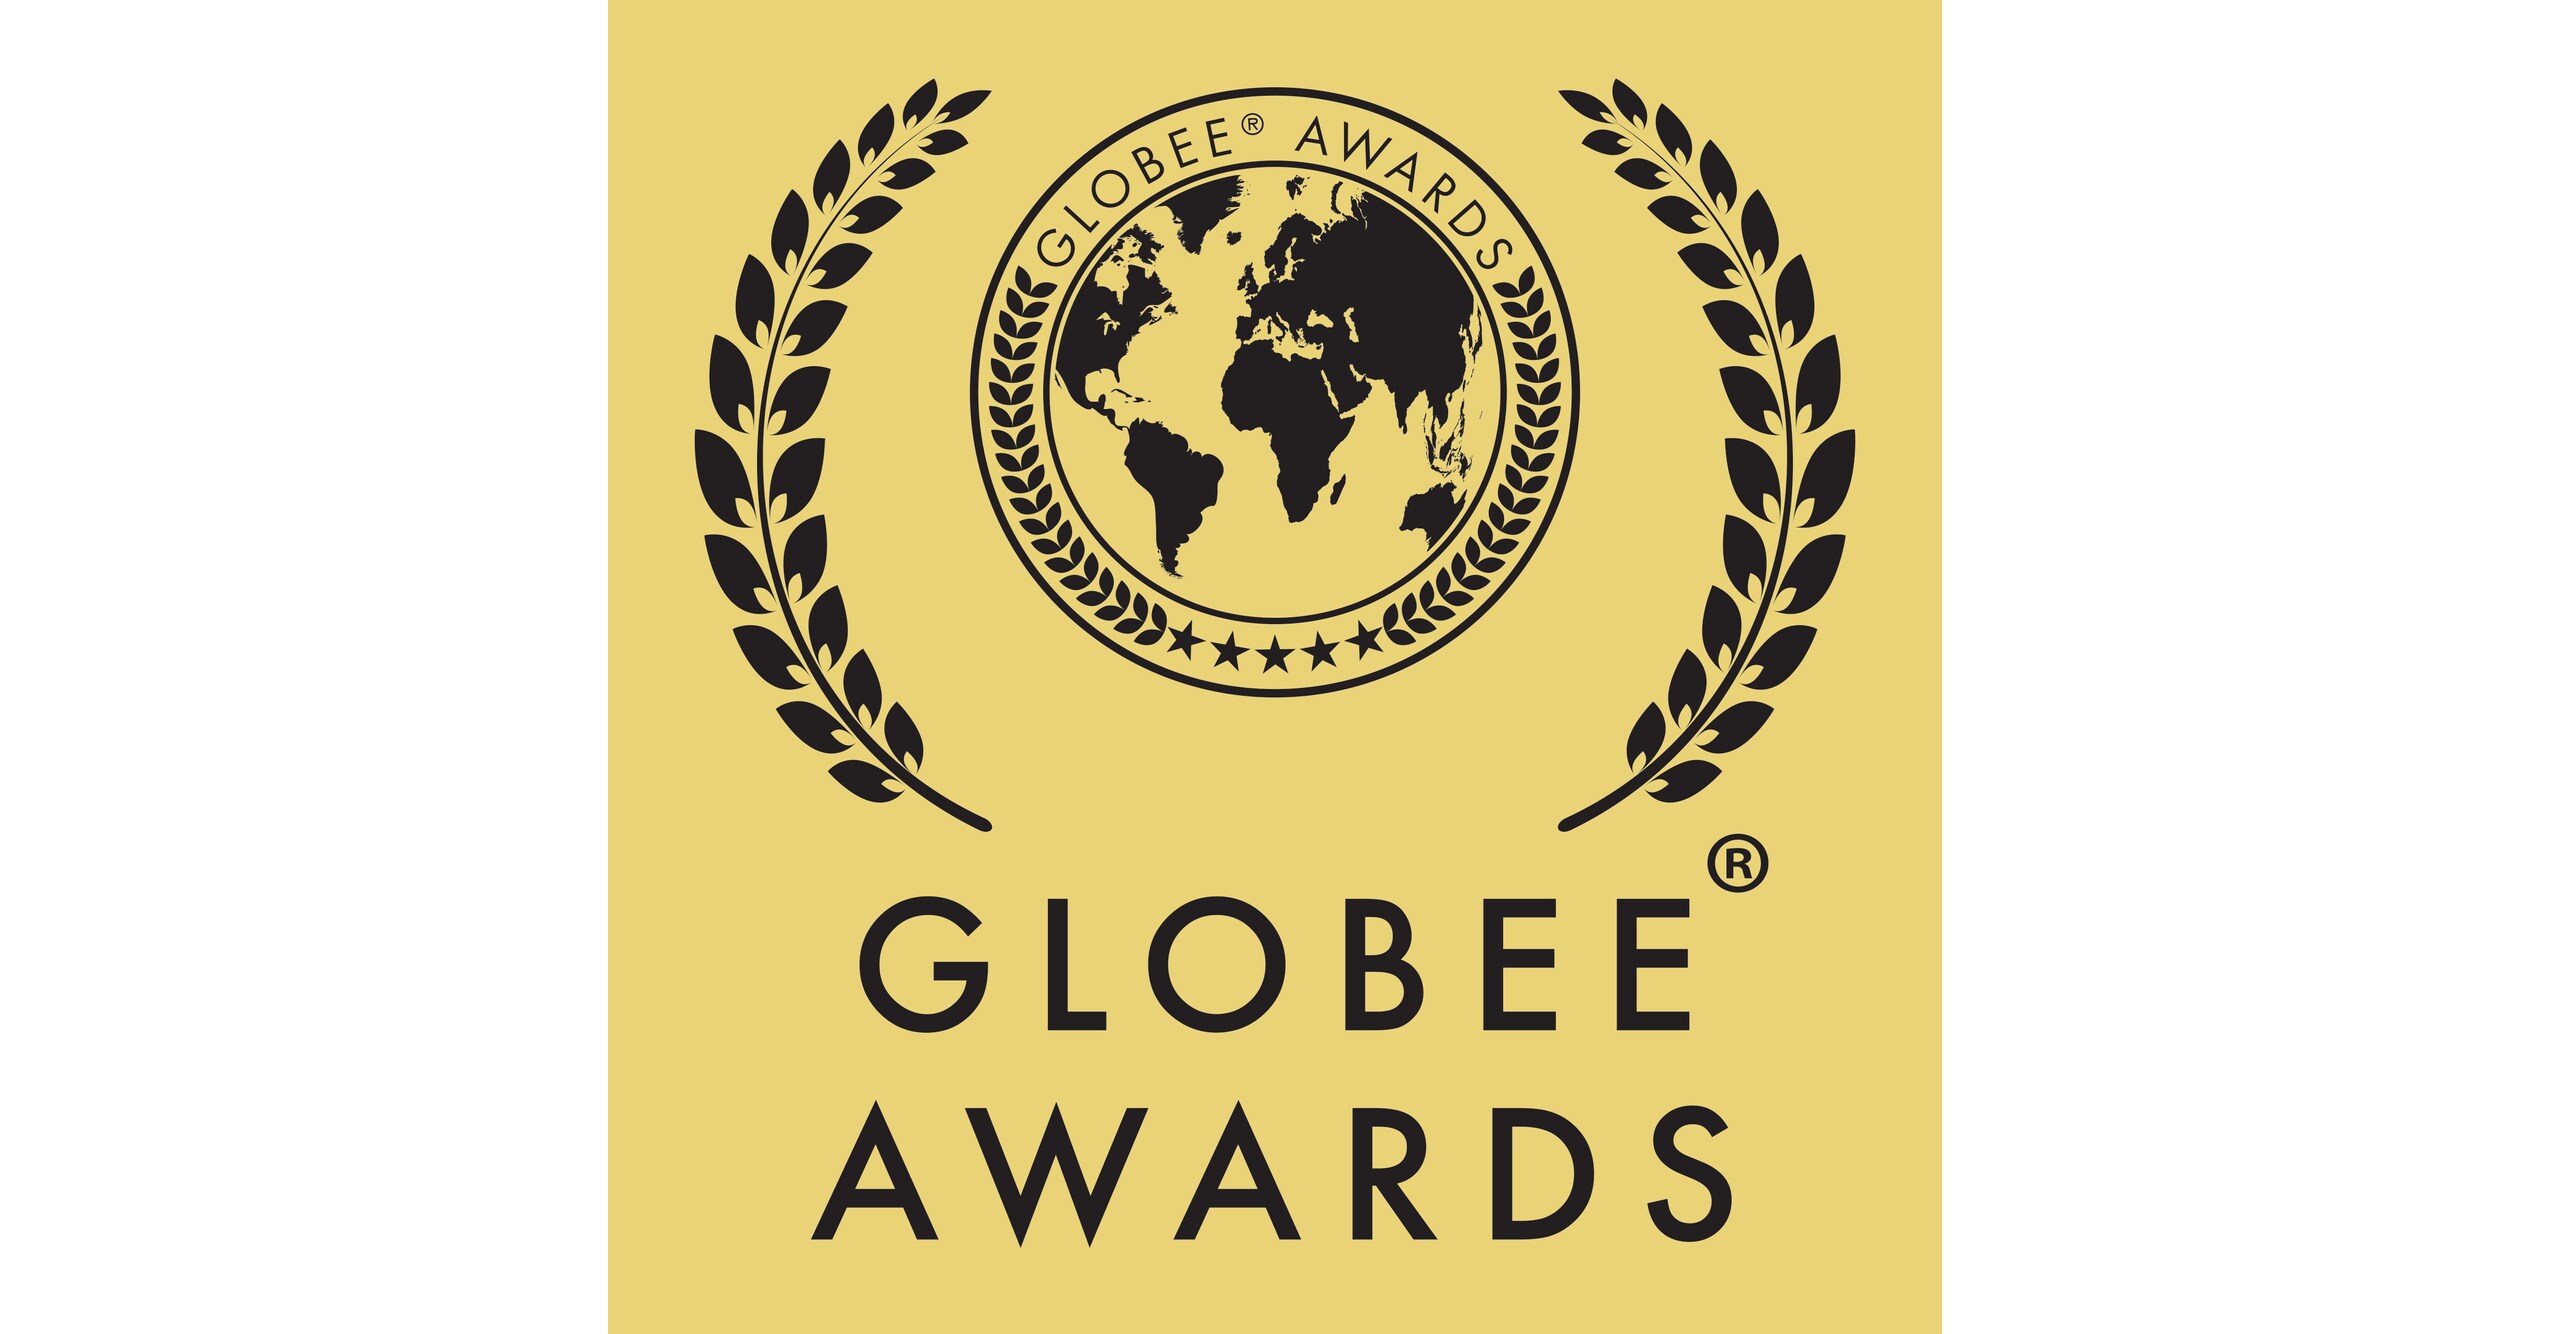 Calling all individuals to submit their Artificial Intelligence achievements for Globee® Awards in Technology